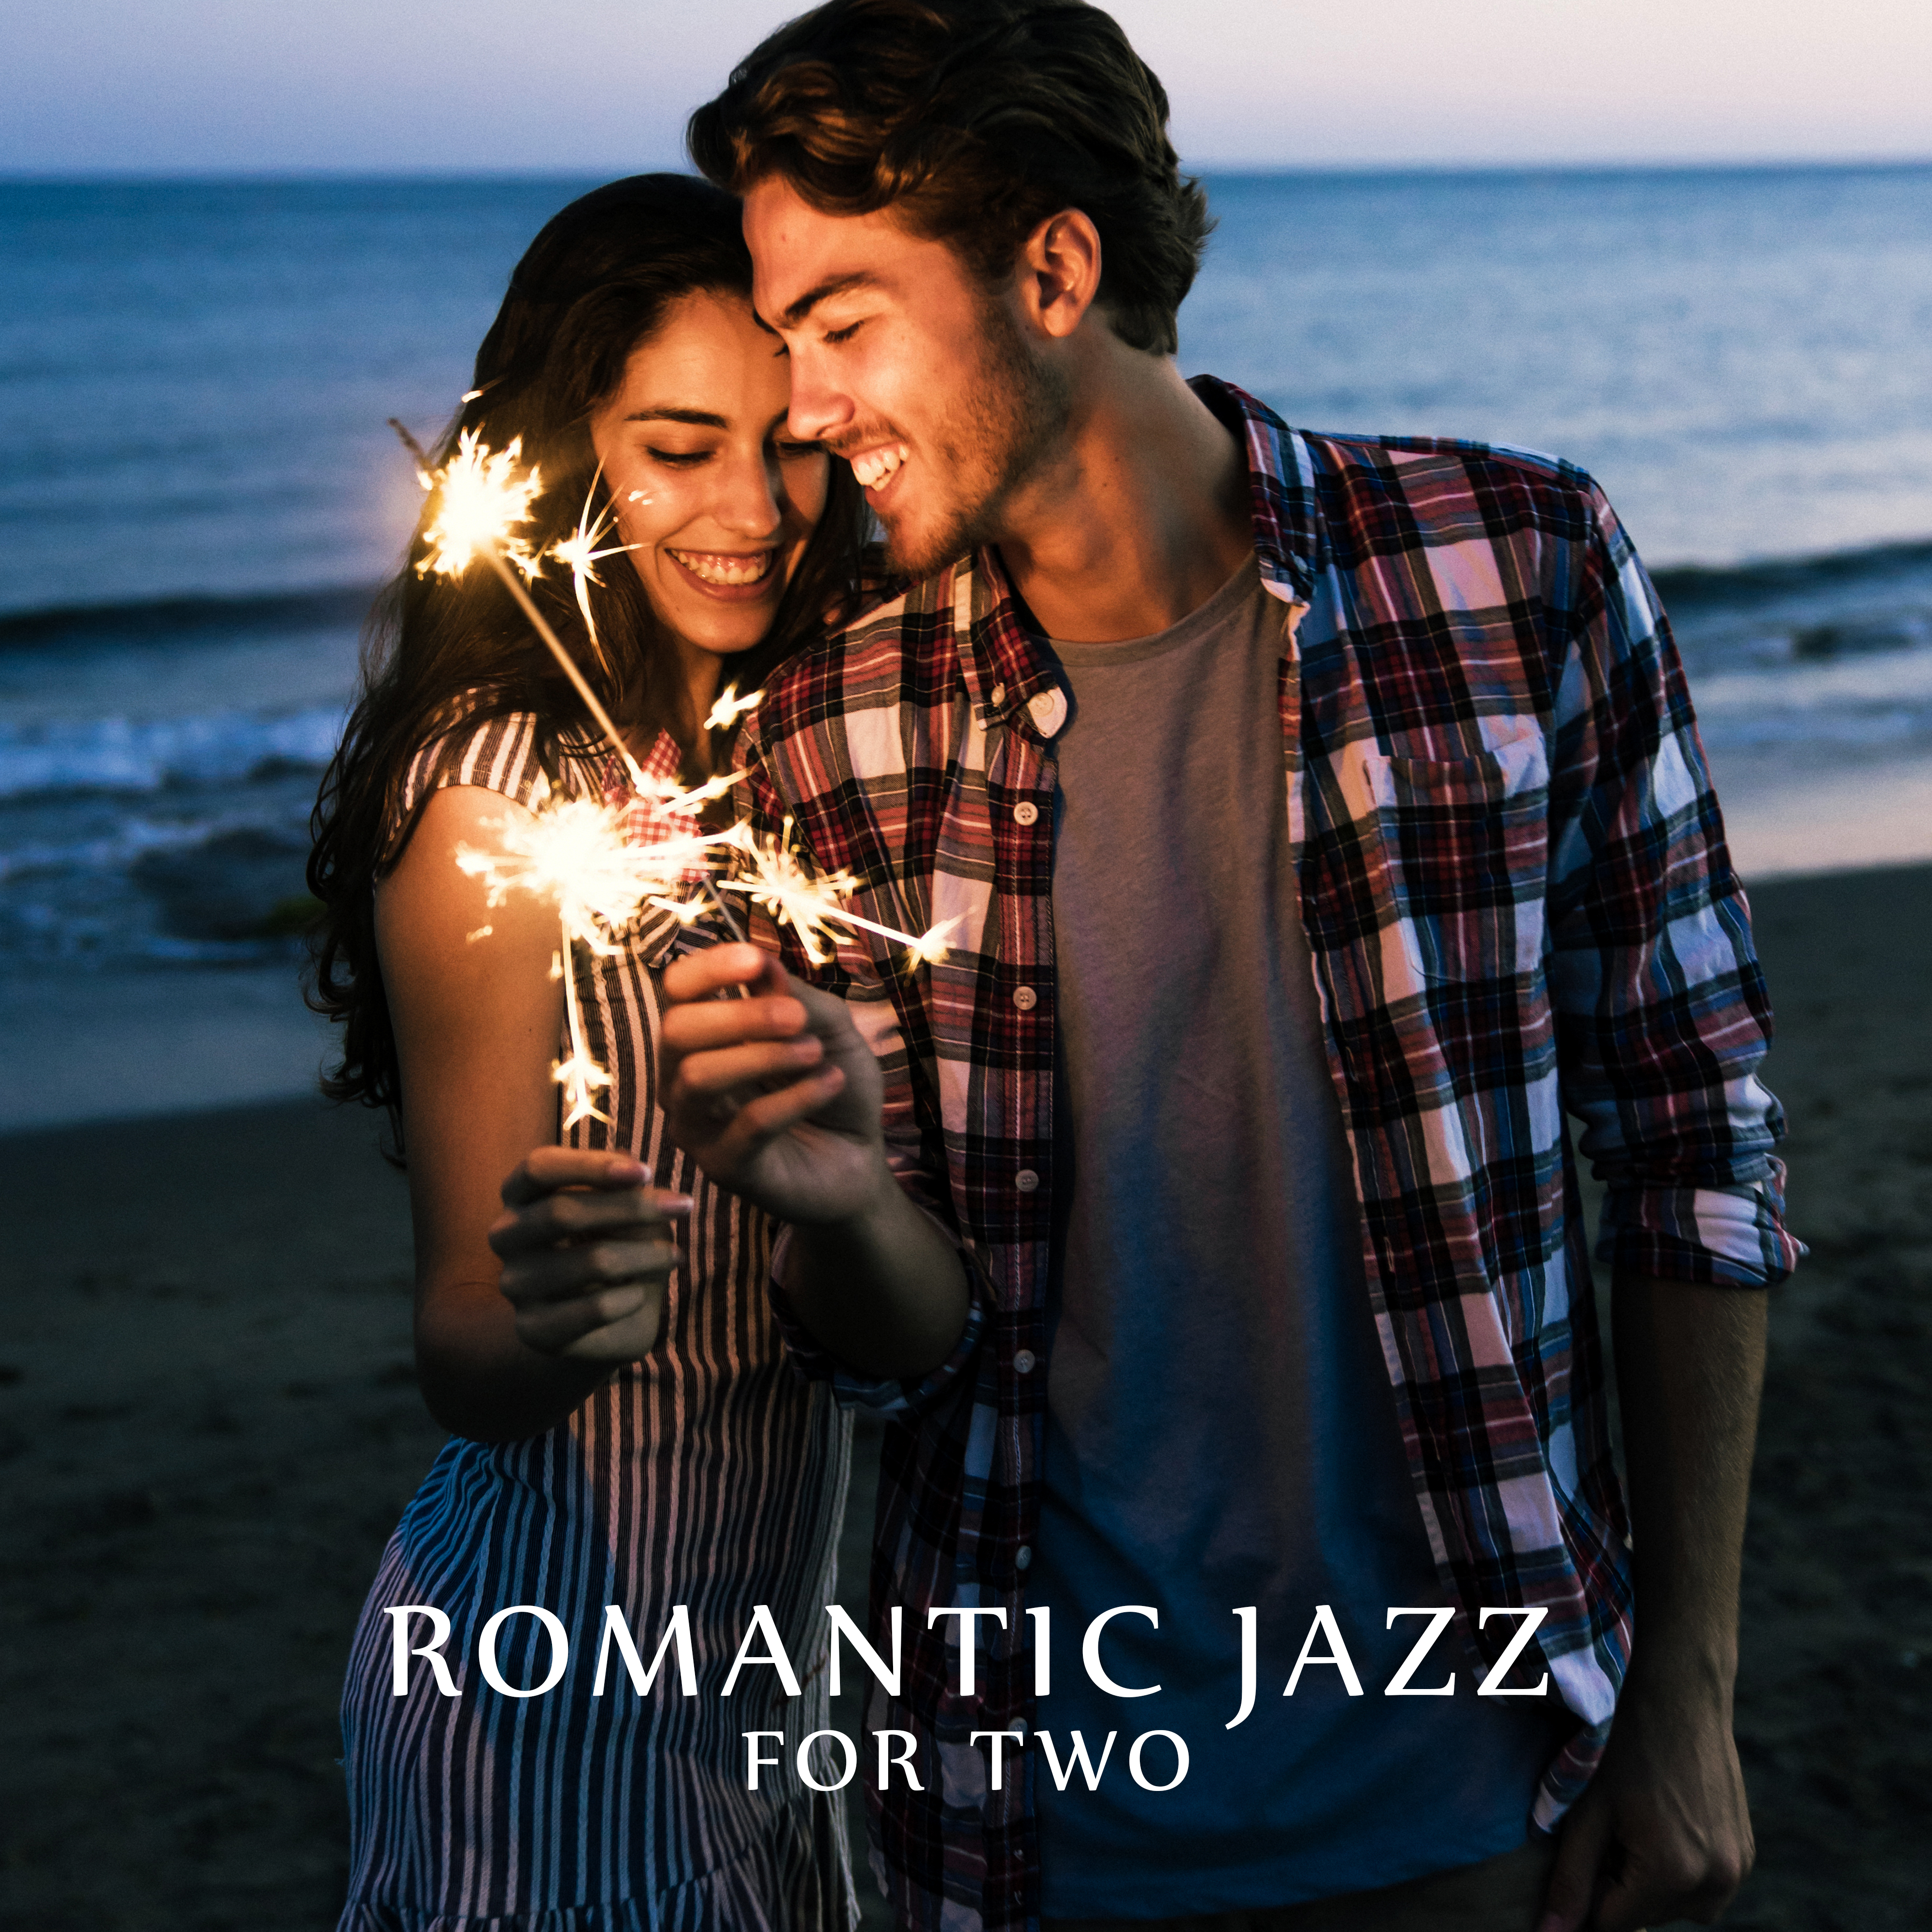 Romantic Jazz for Two